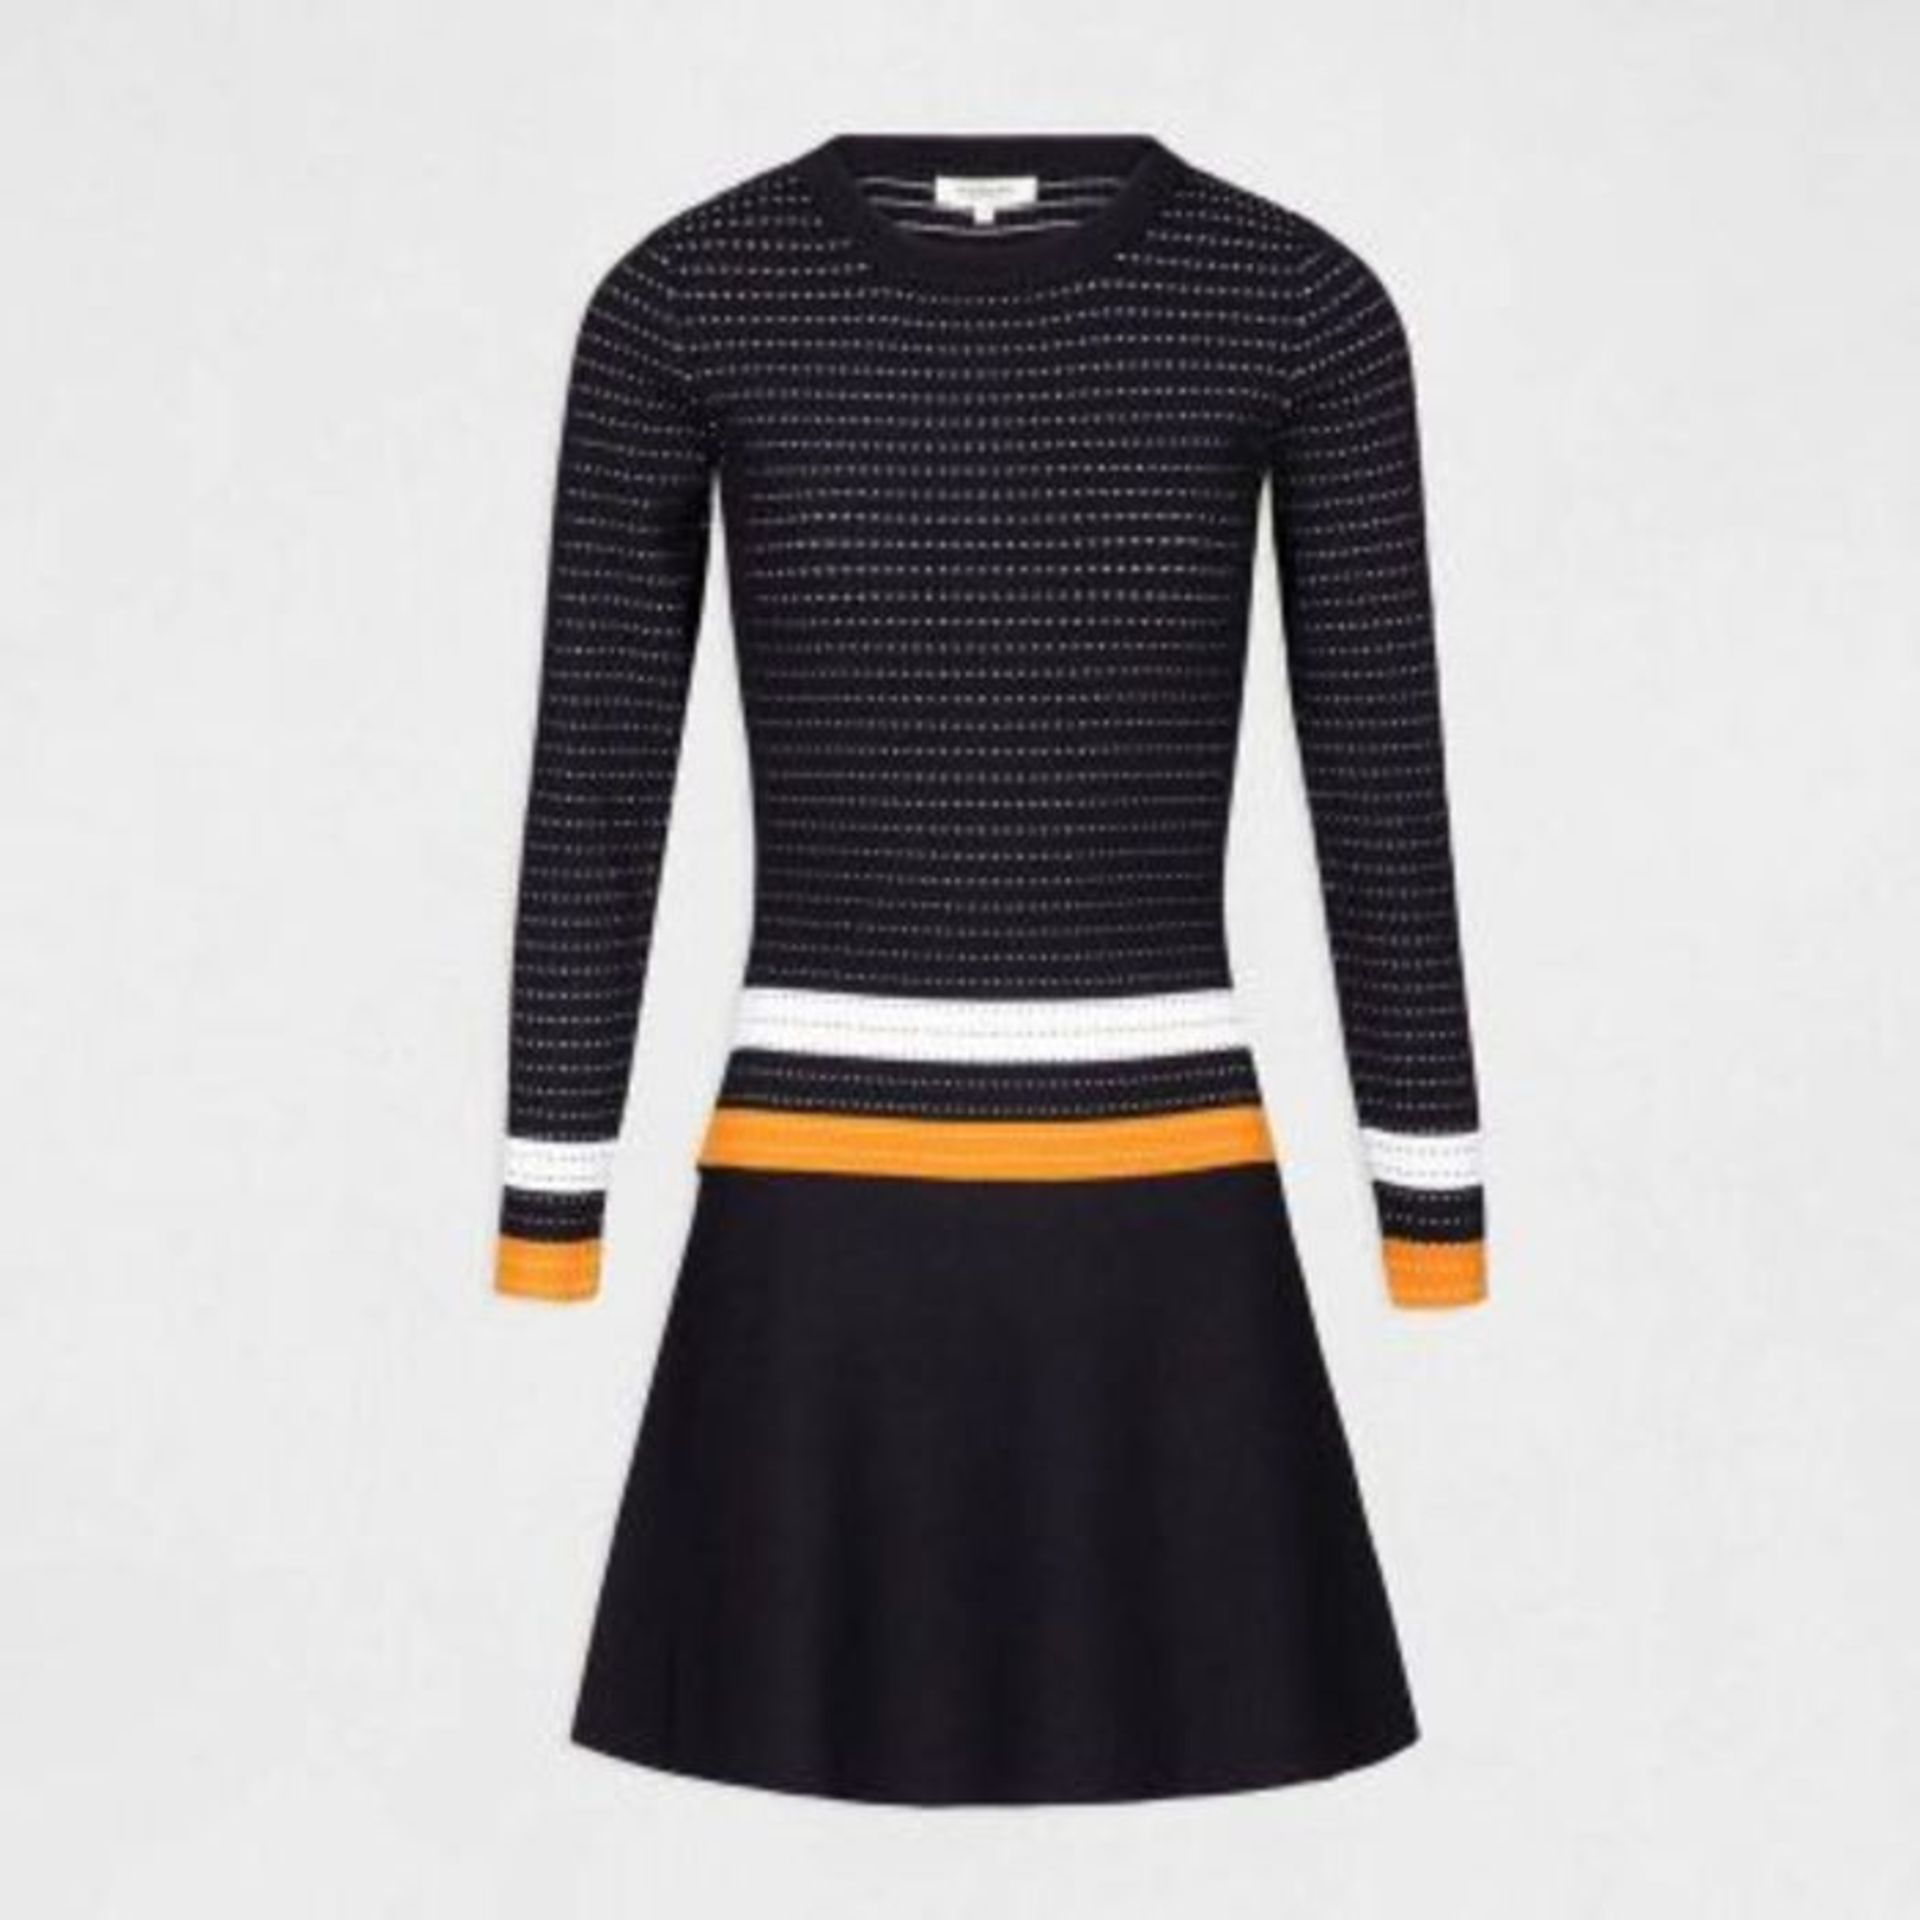 MORGAN - STRIPED RIBBED FLARED DRESS WITH LONG SLEEVES - NAVY / MUSTARD - SIZE: UK 10. RRP £62.00 AS